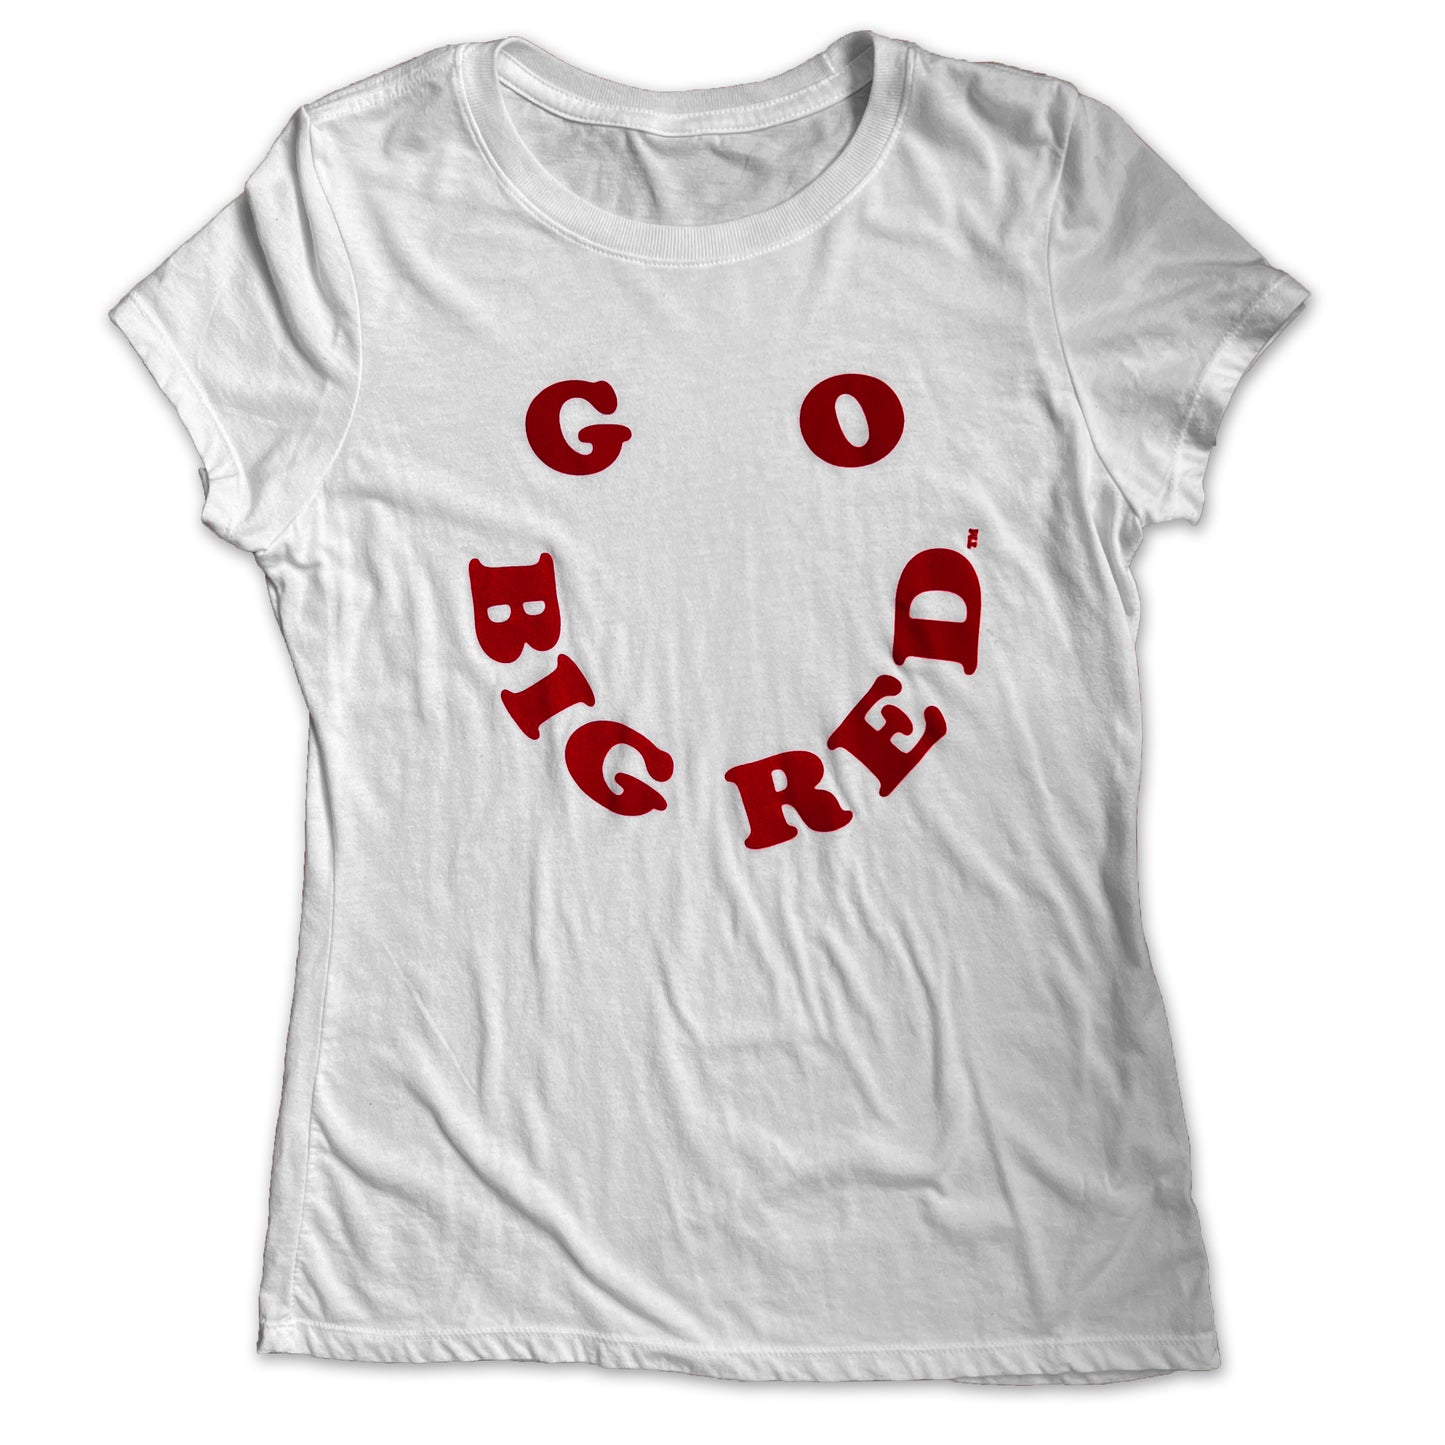 Go Big Red Smile tee